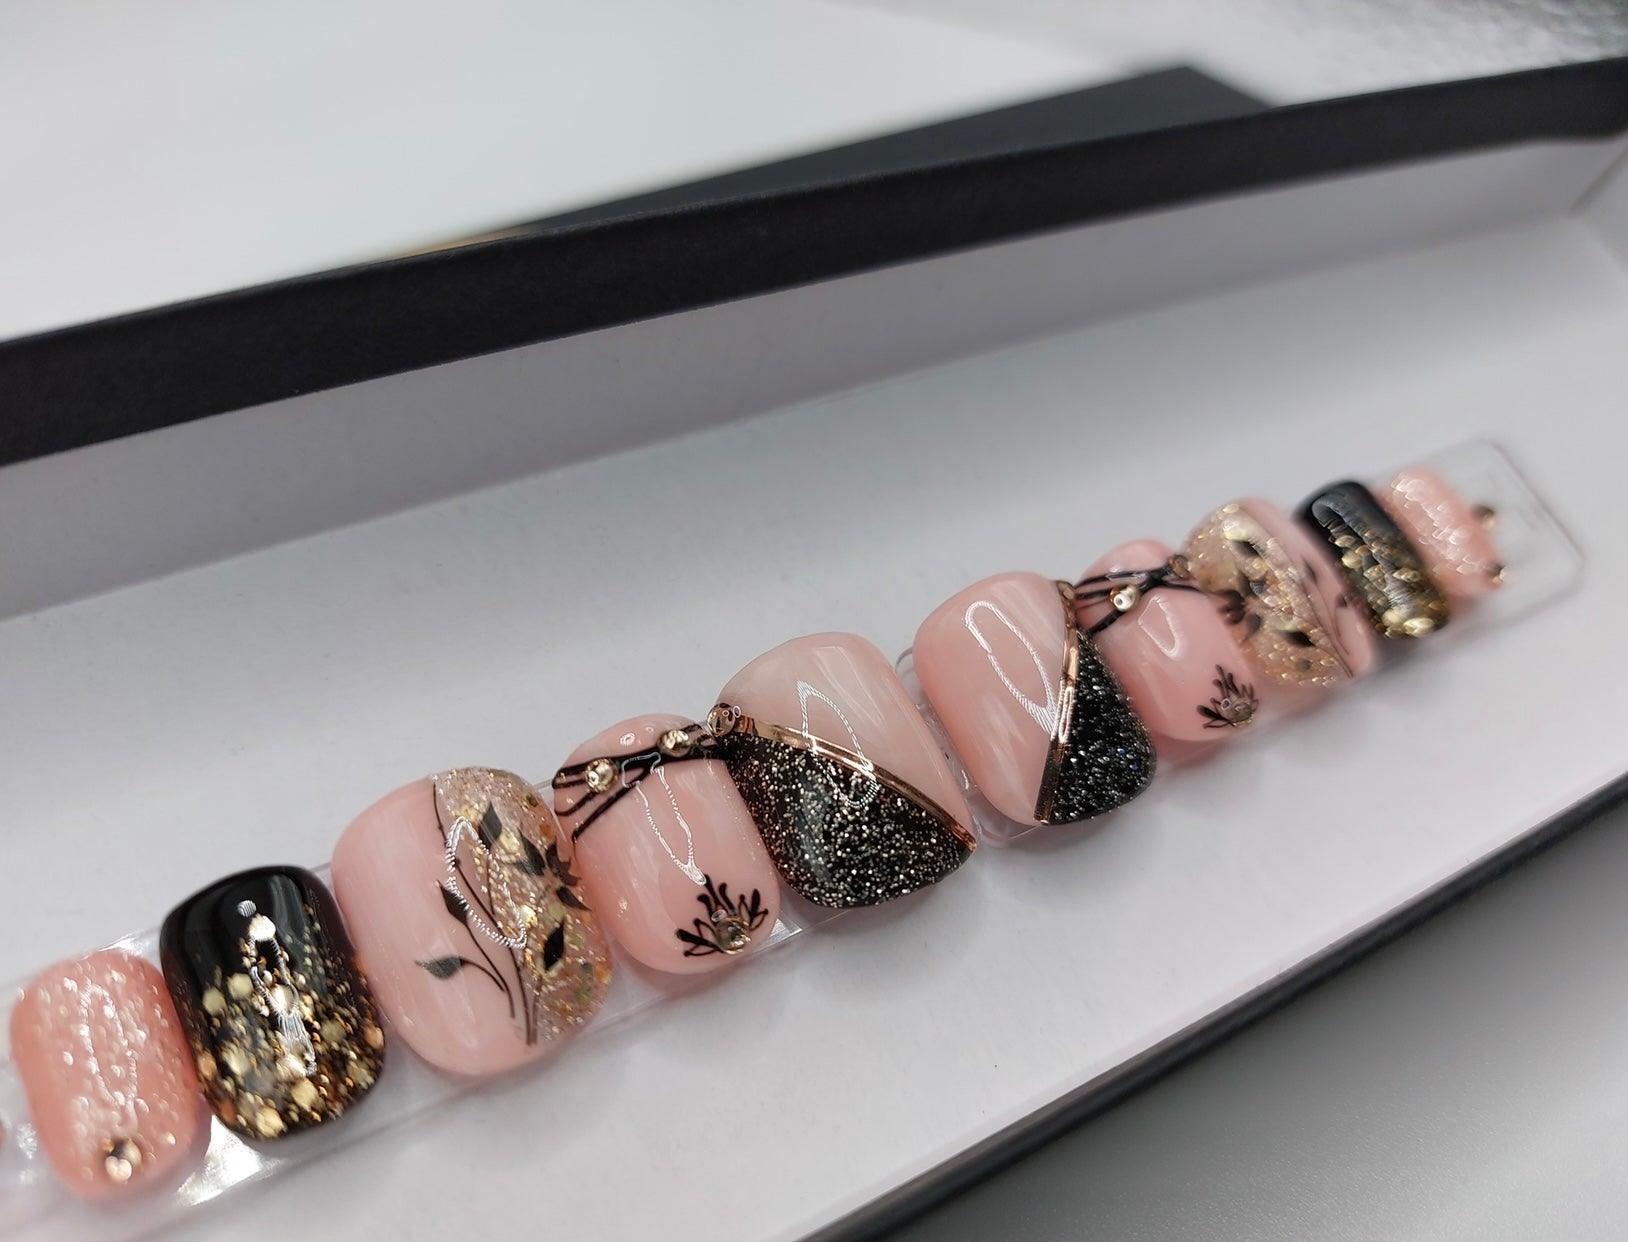 Custom press on nail design in a light pink, soft rose quartz base color with black and gold glitter accents, floral designs, champagne gems and a short squoval shape.